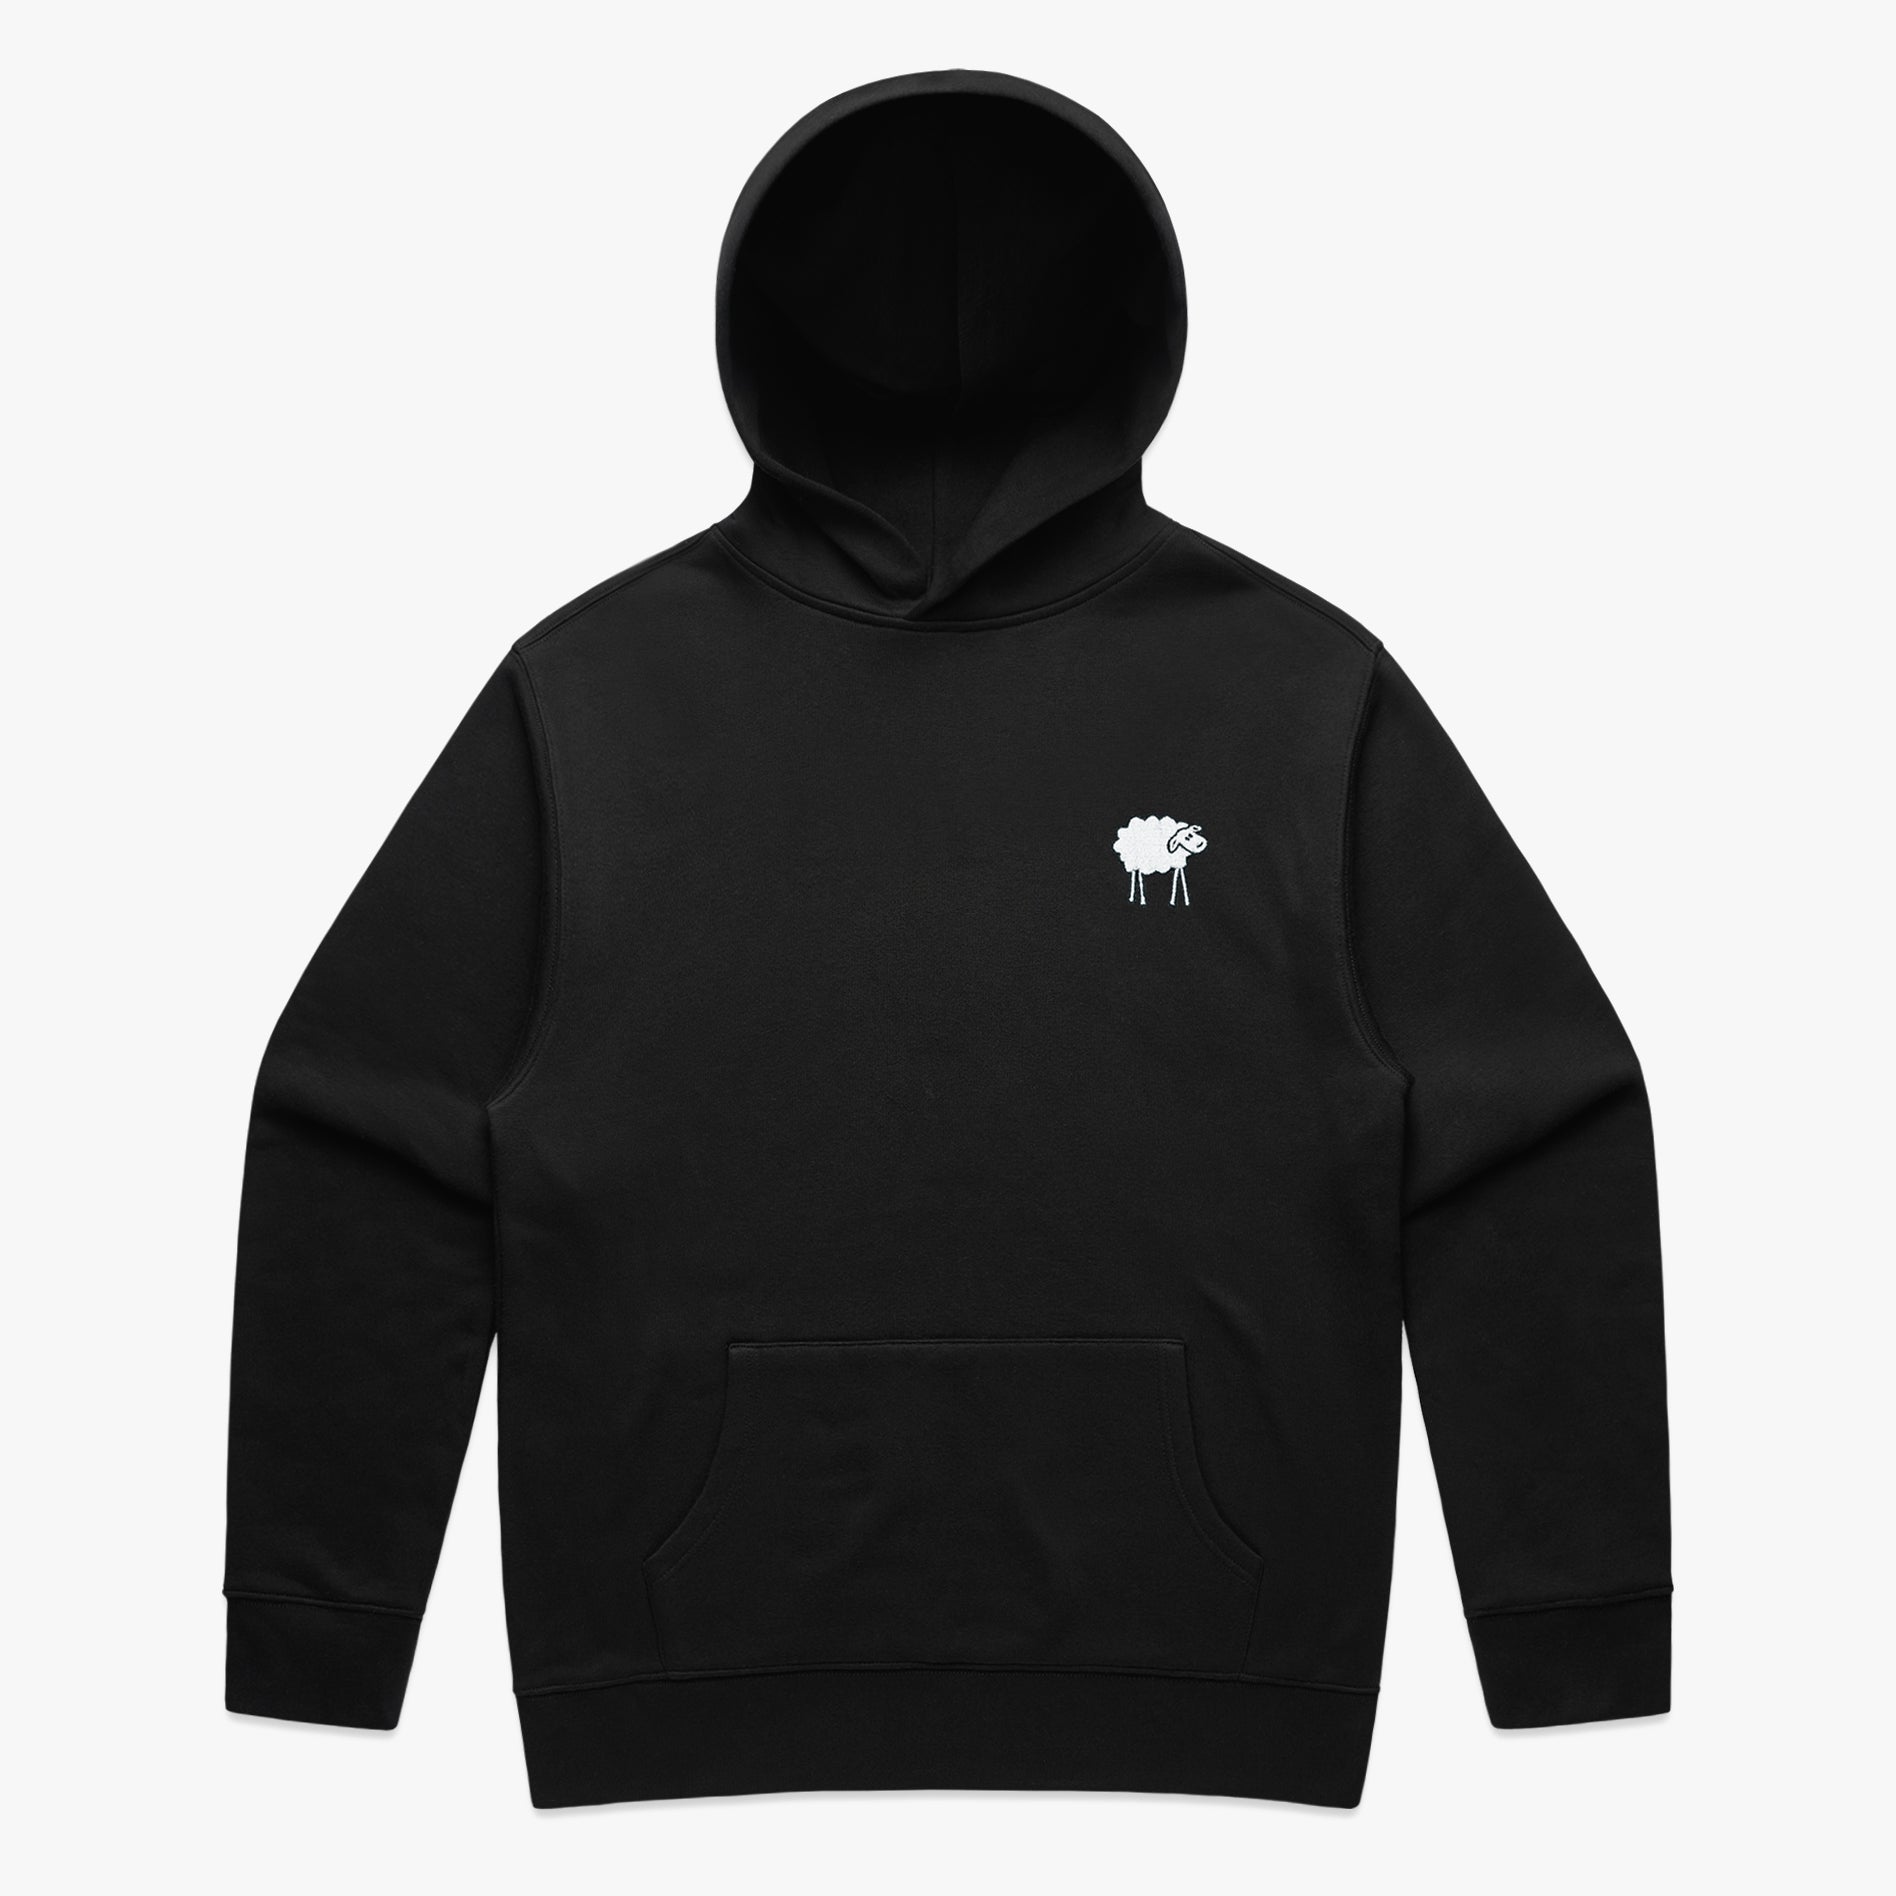 SHEEPEY OG Embroidered Relax Hoodie Black